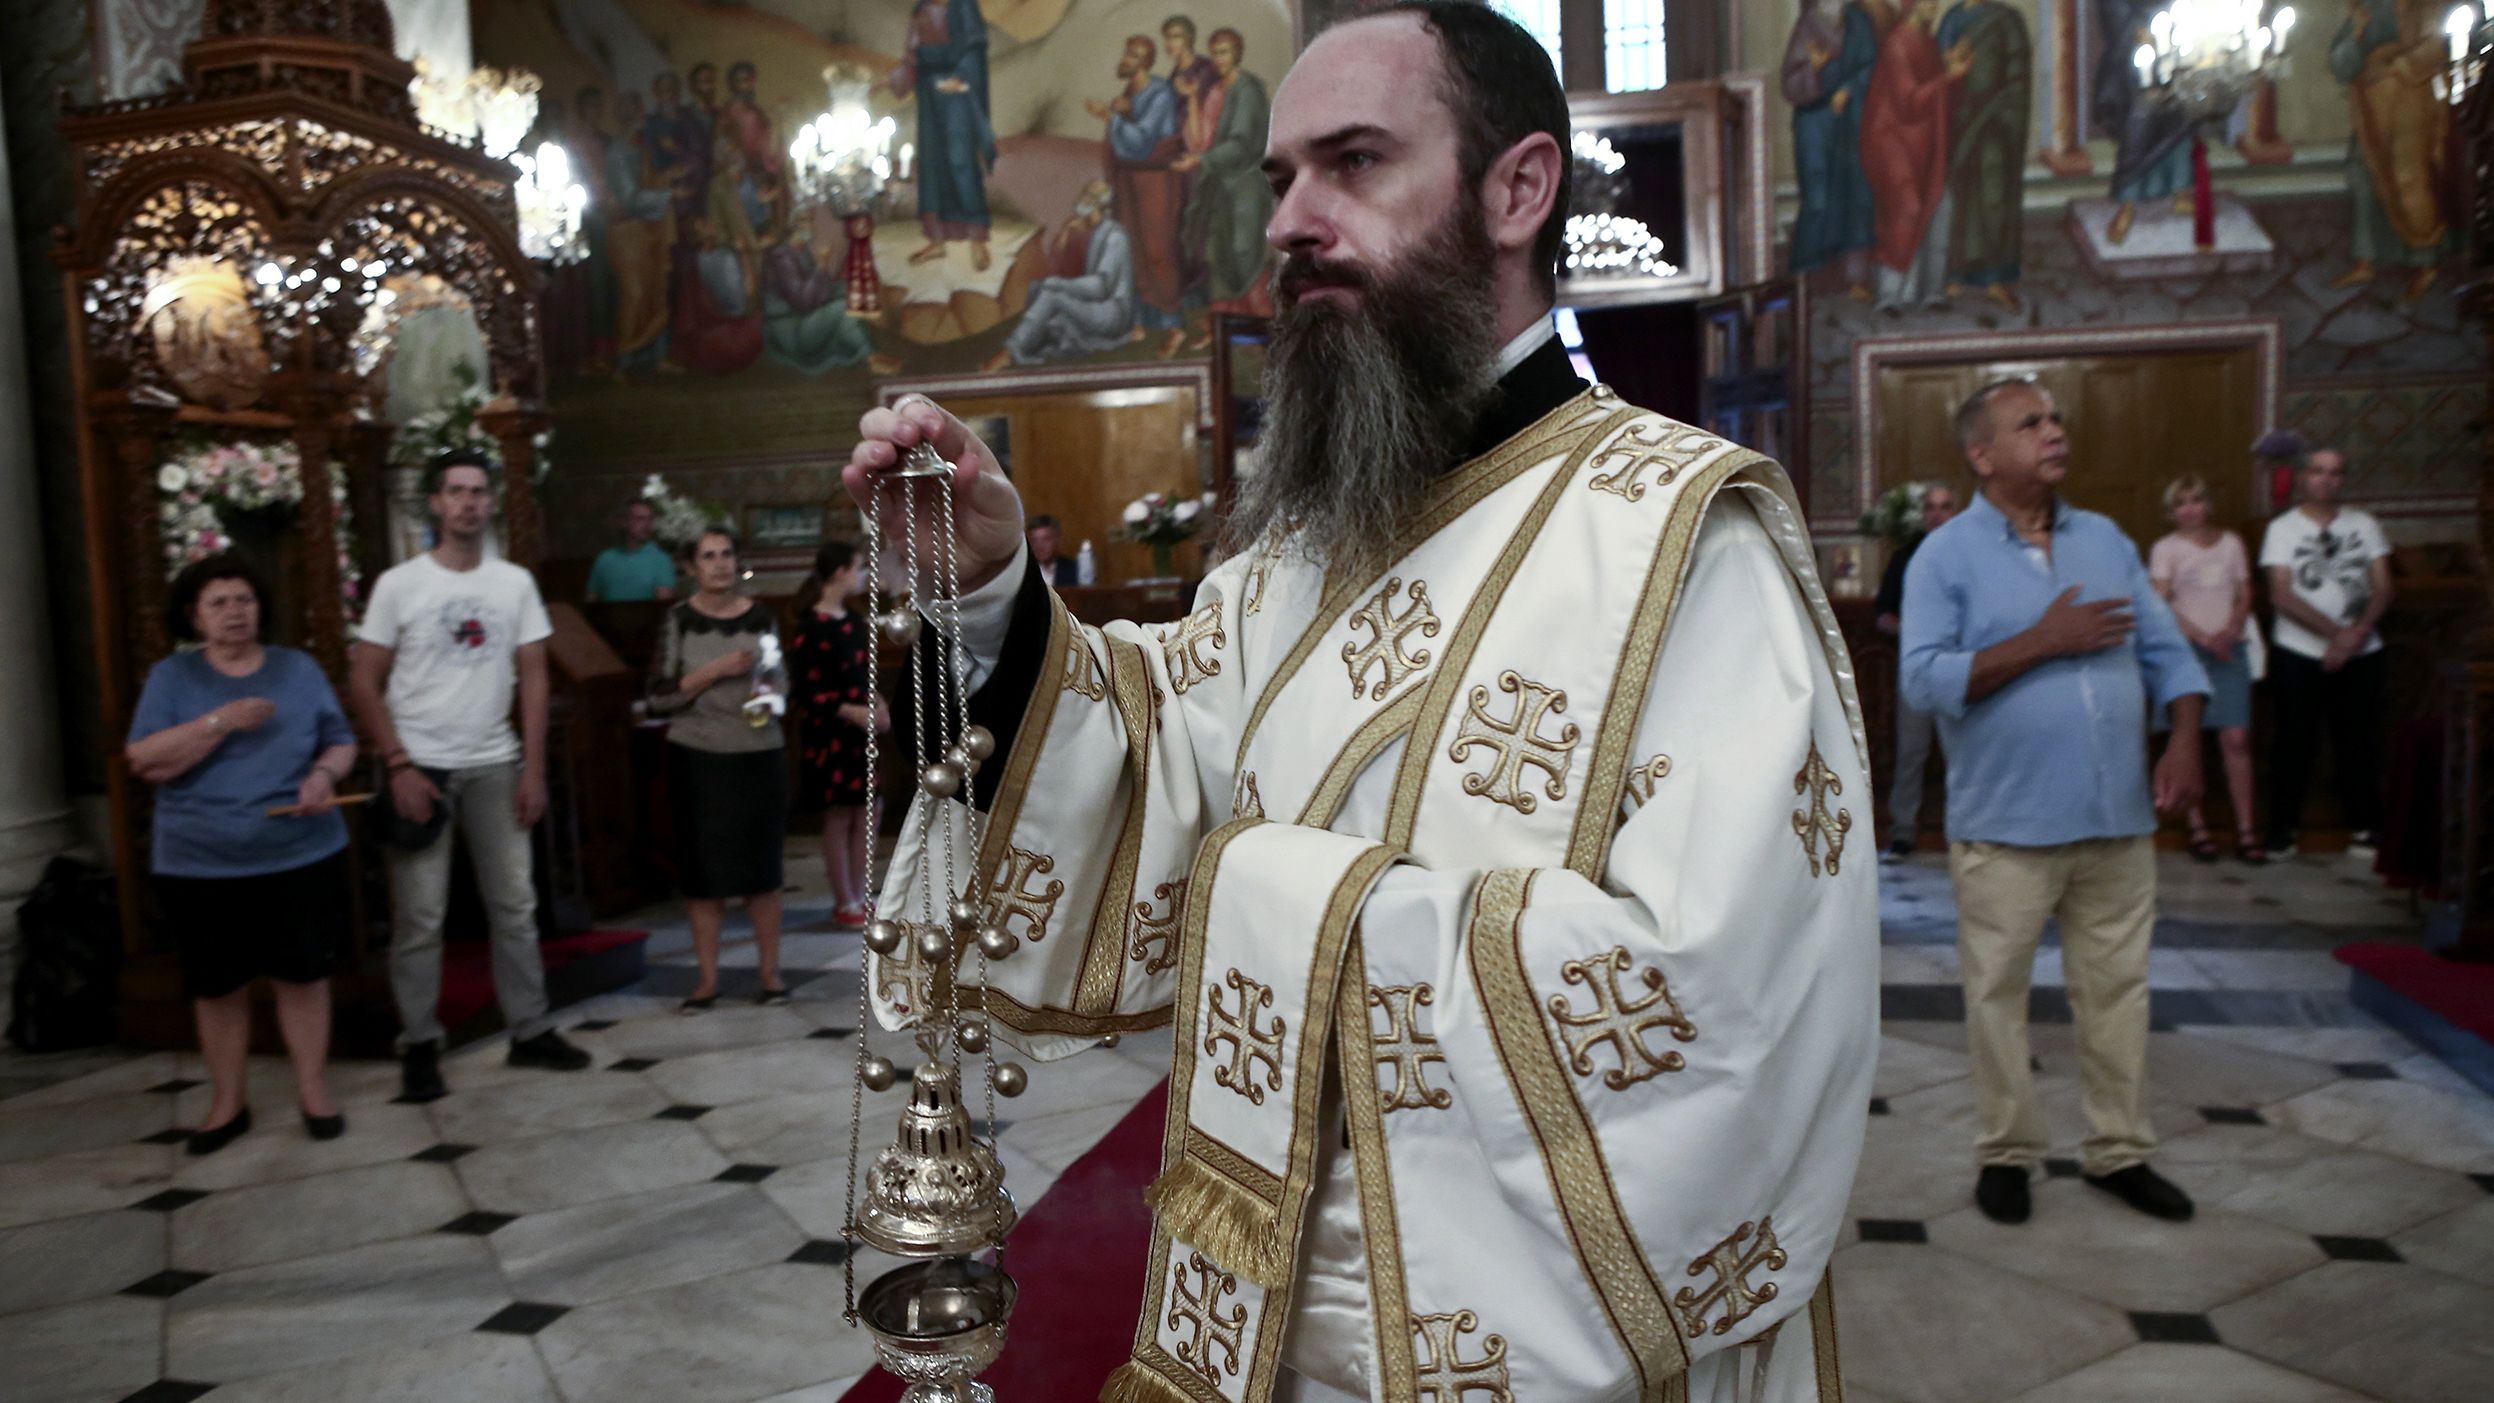 Christian Orthodox faithfuls attend a liturgy in Athens, Greece, on May 20.